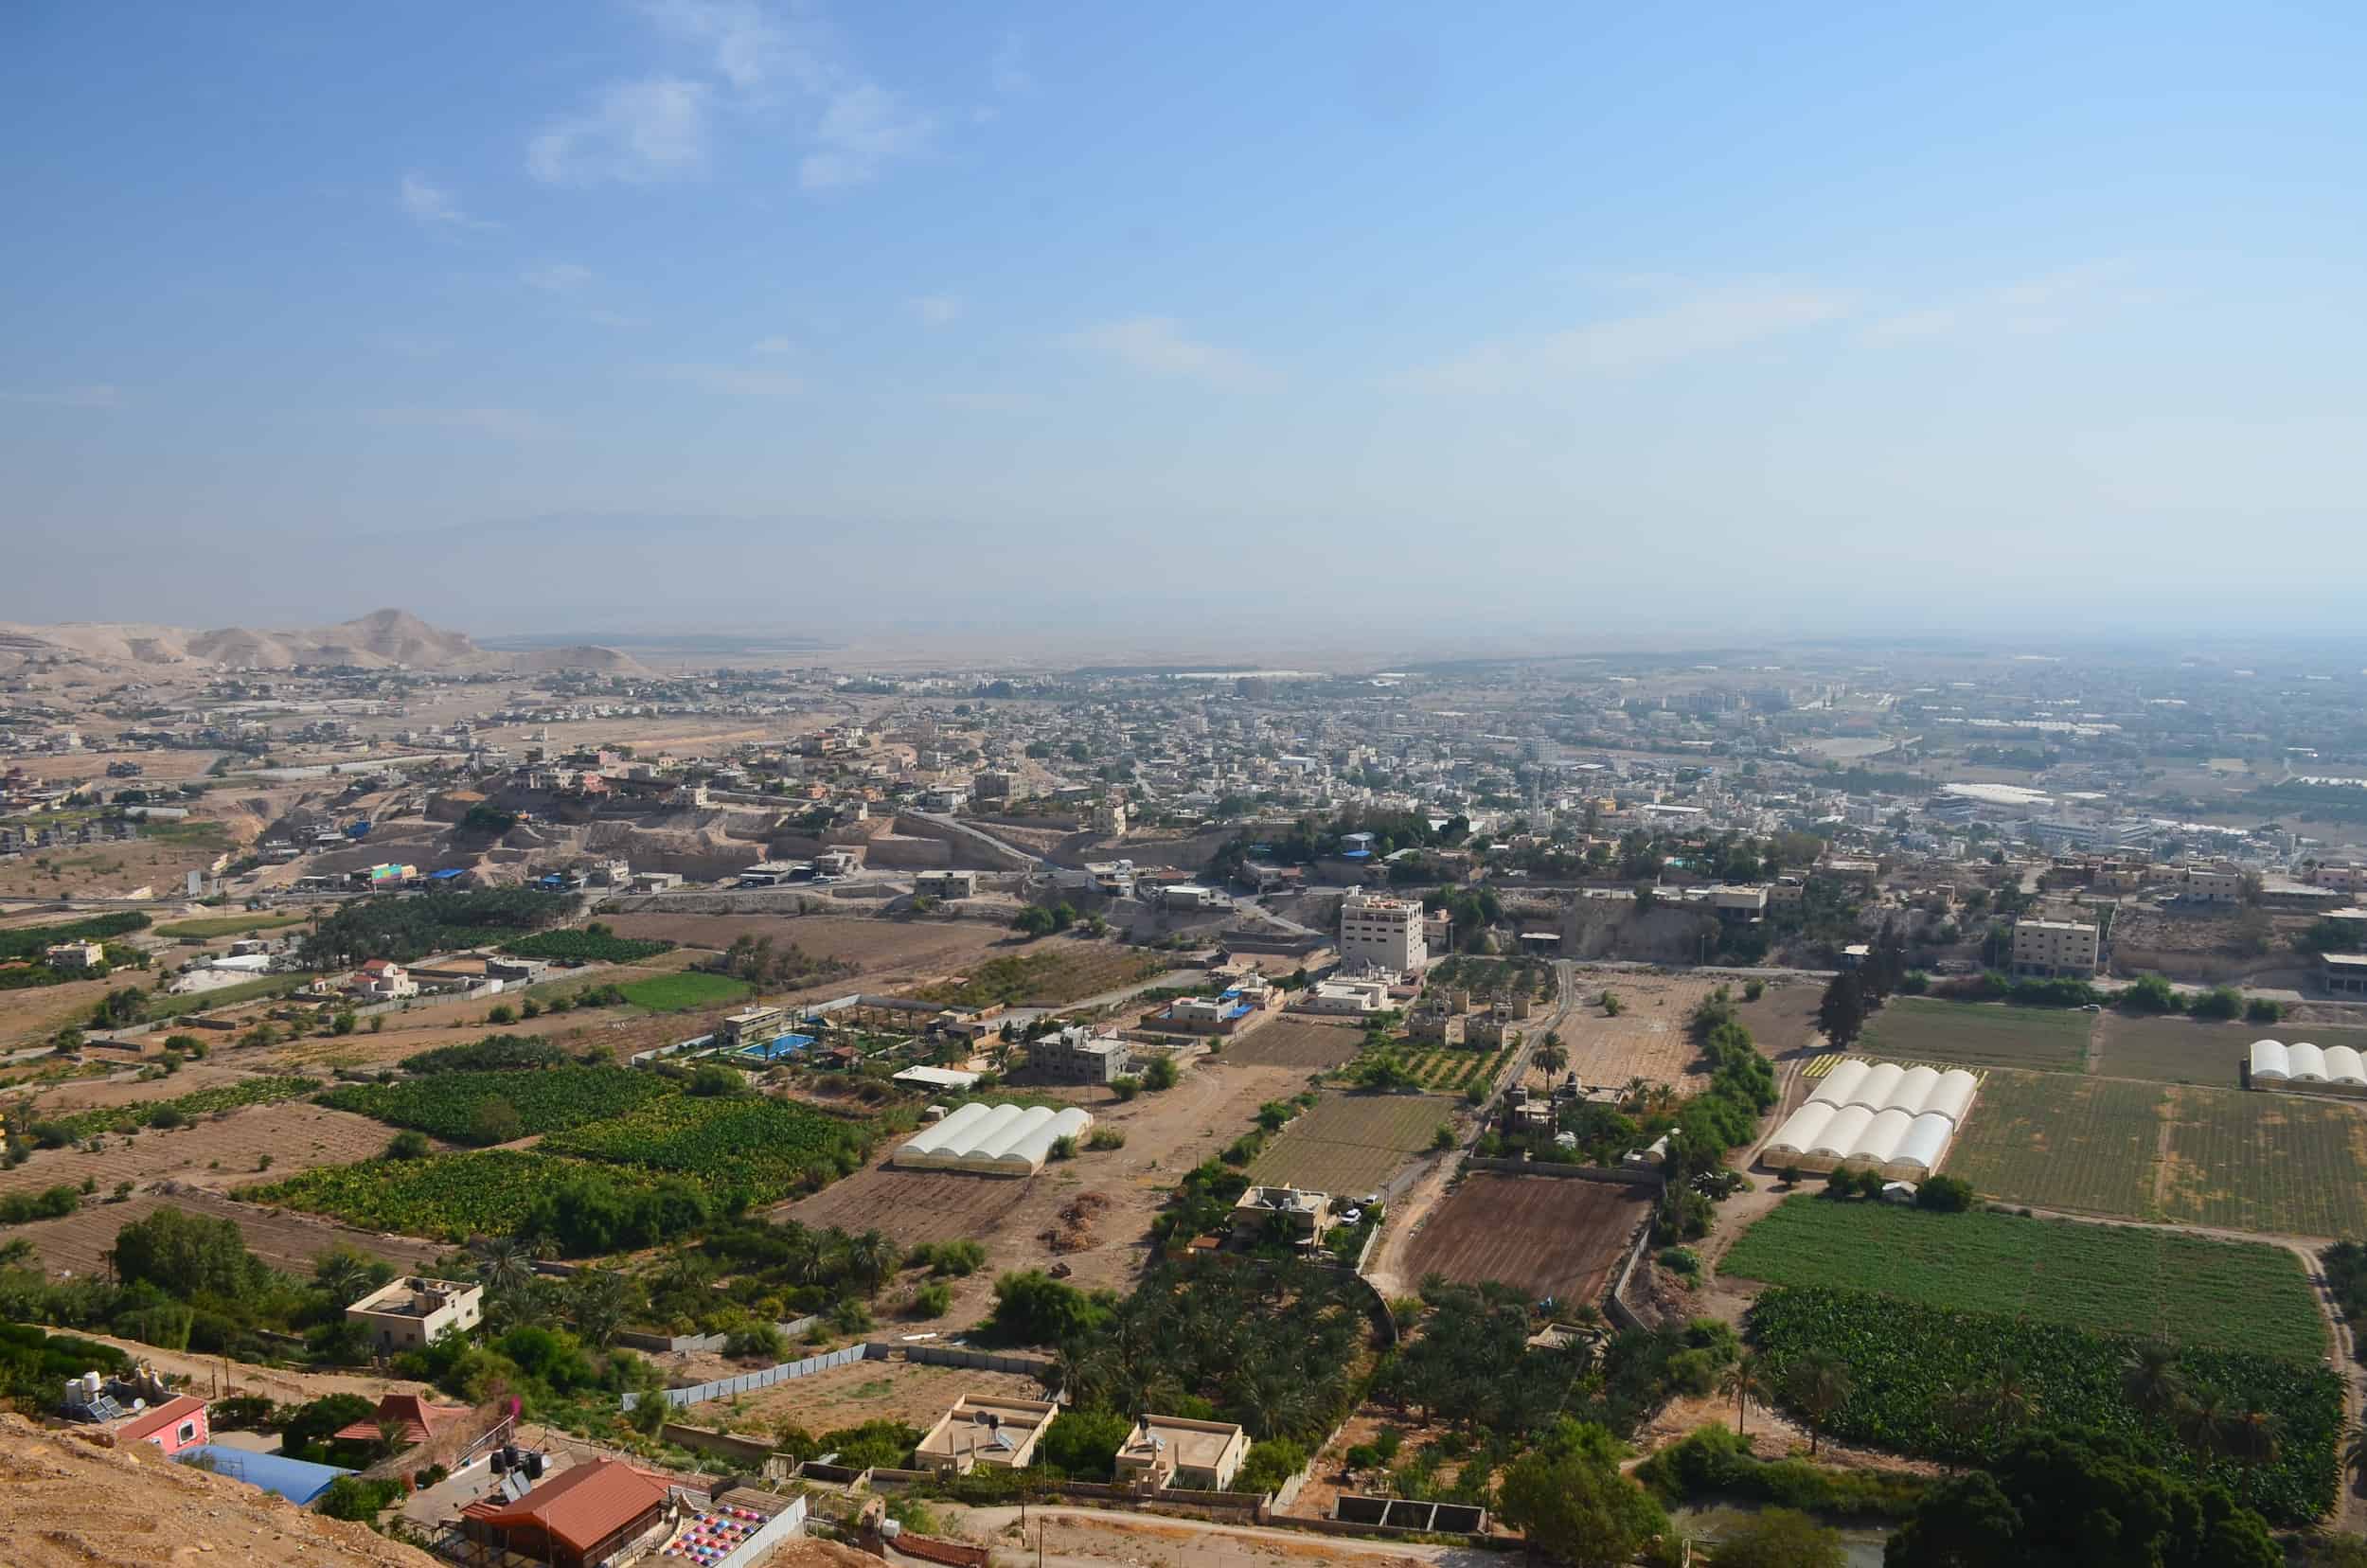 View from the top of the Mount of Temptation in Jericho, Palestine